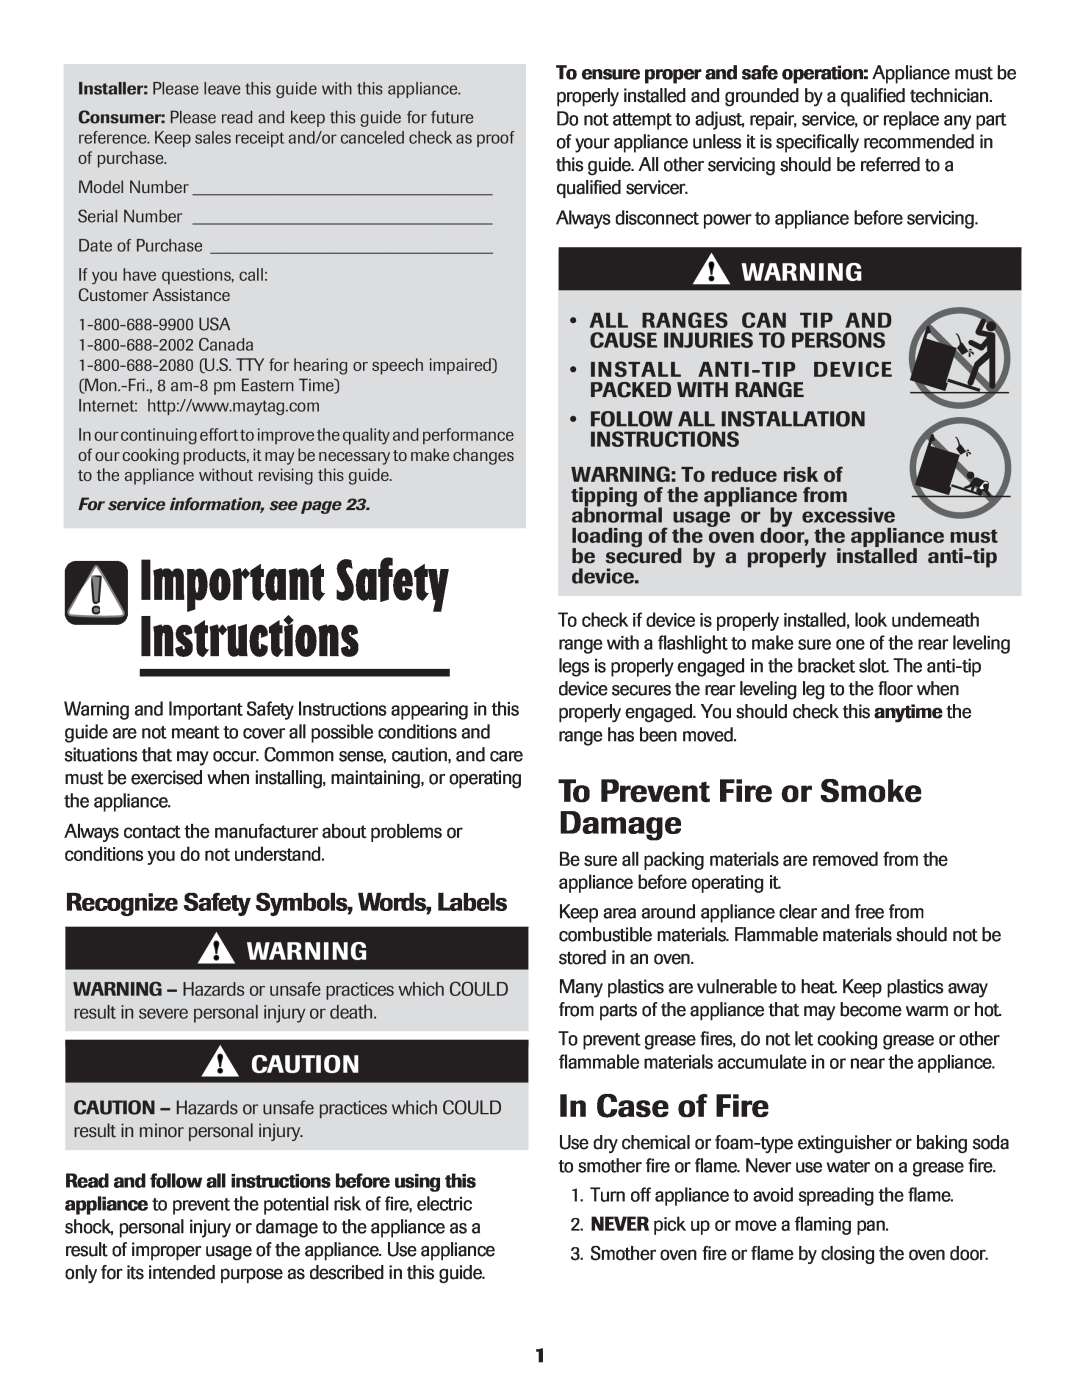 Maytag MER5552BAW warranty Instructions, Important Safety, To Prevent Fire or Smoke Damage, In Case of Fire 